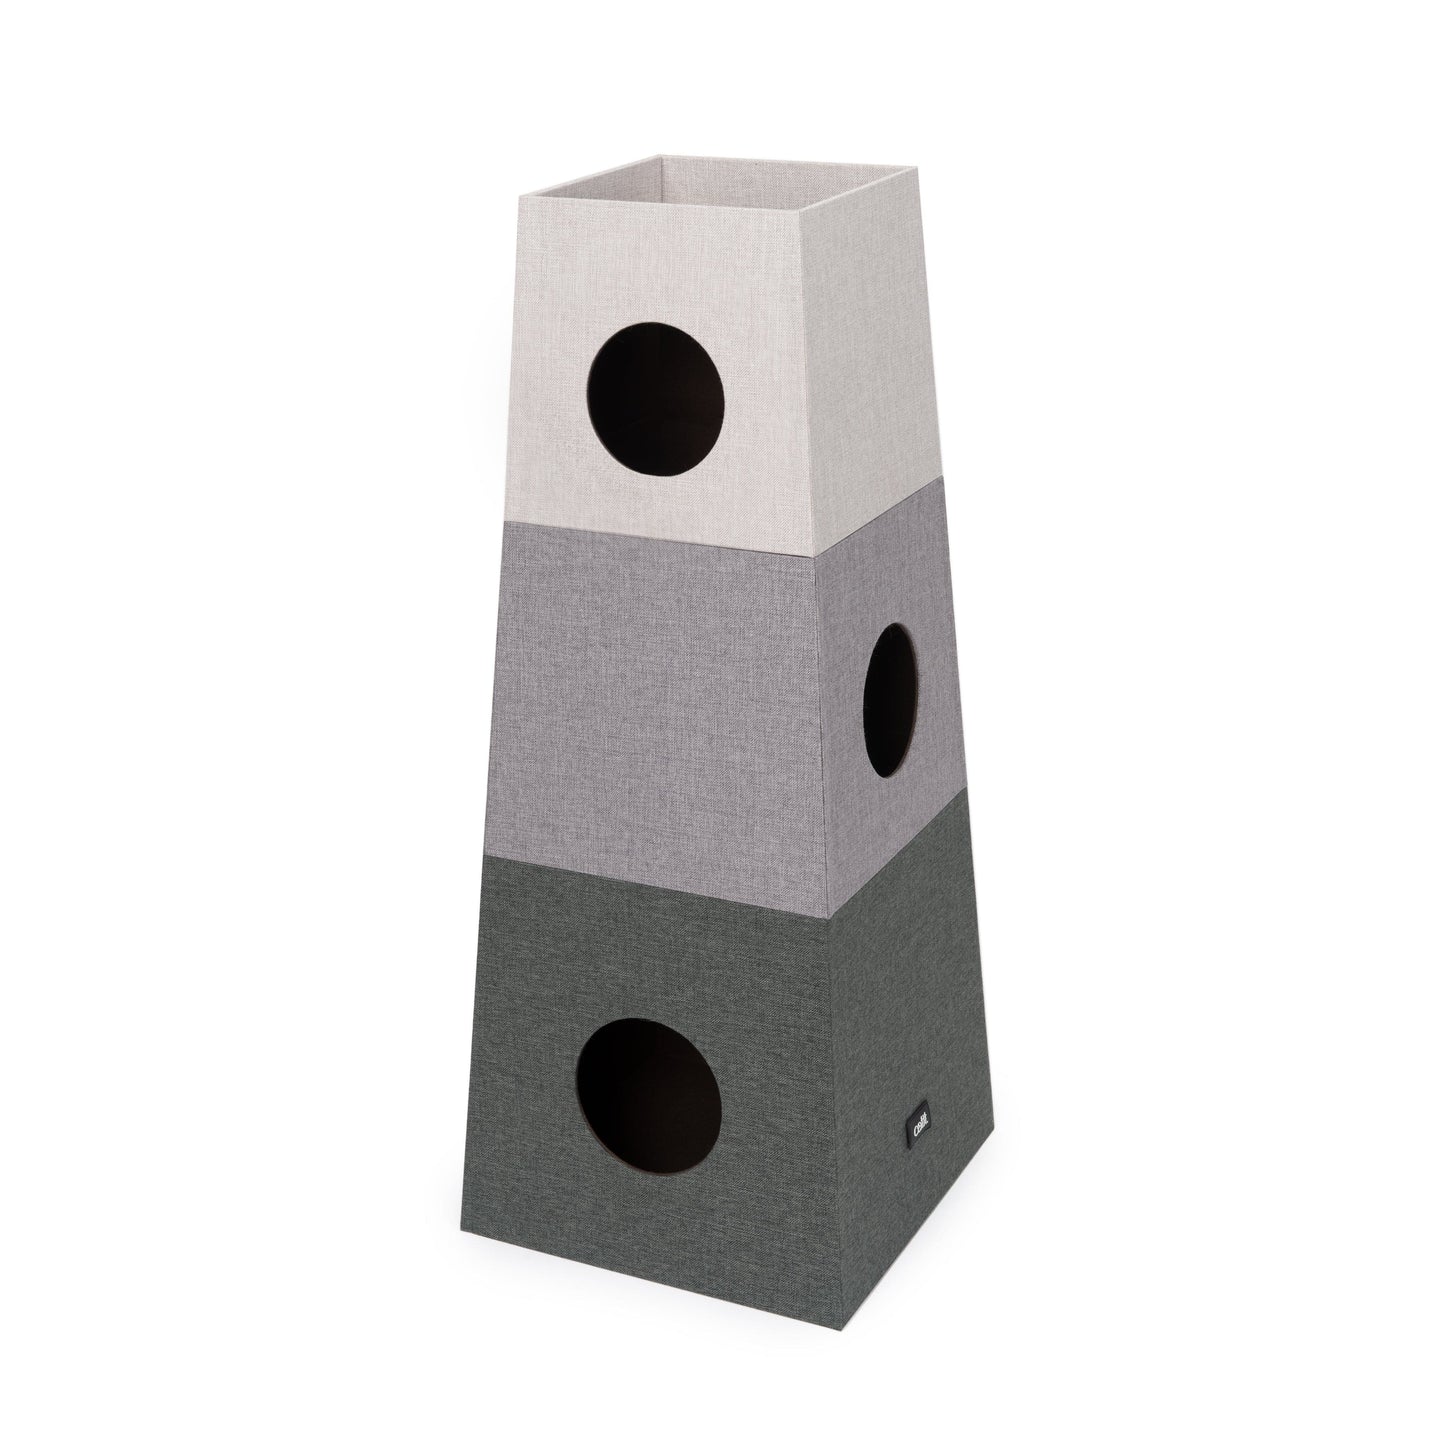 Catit Stacking Tower – Square